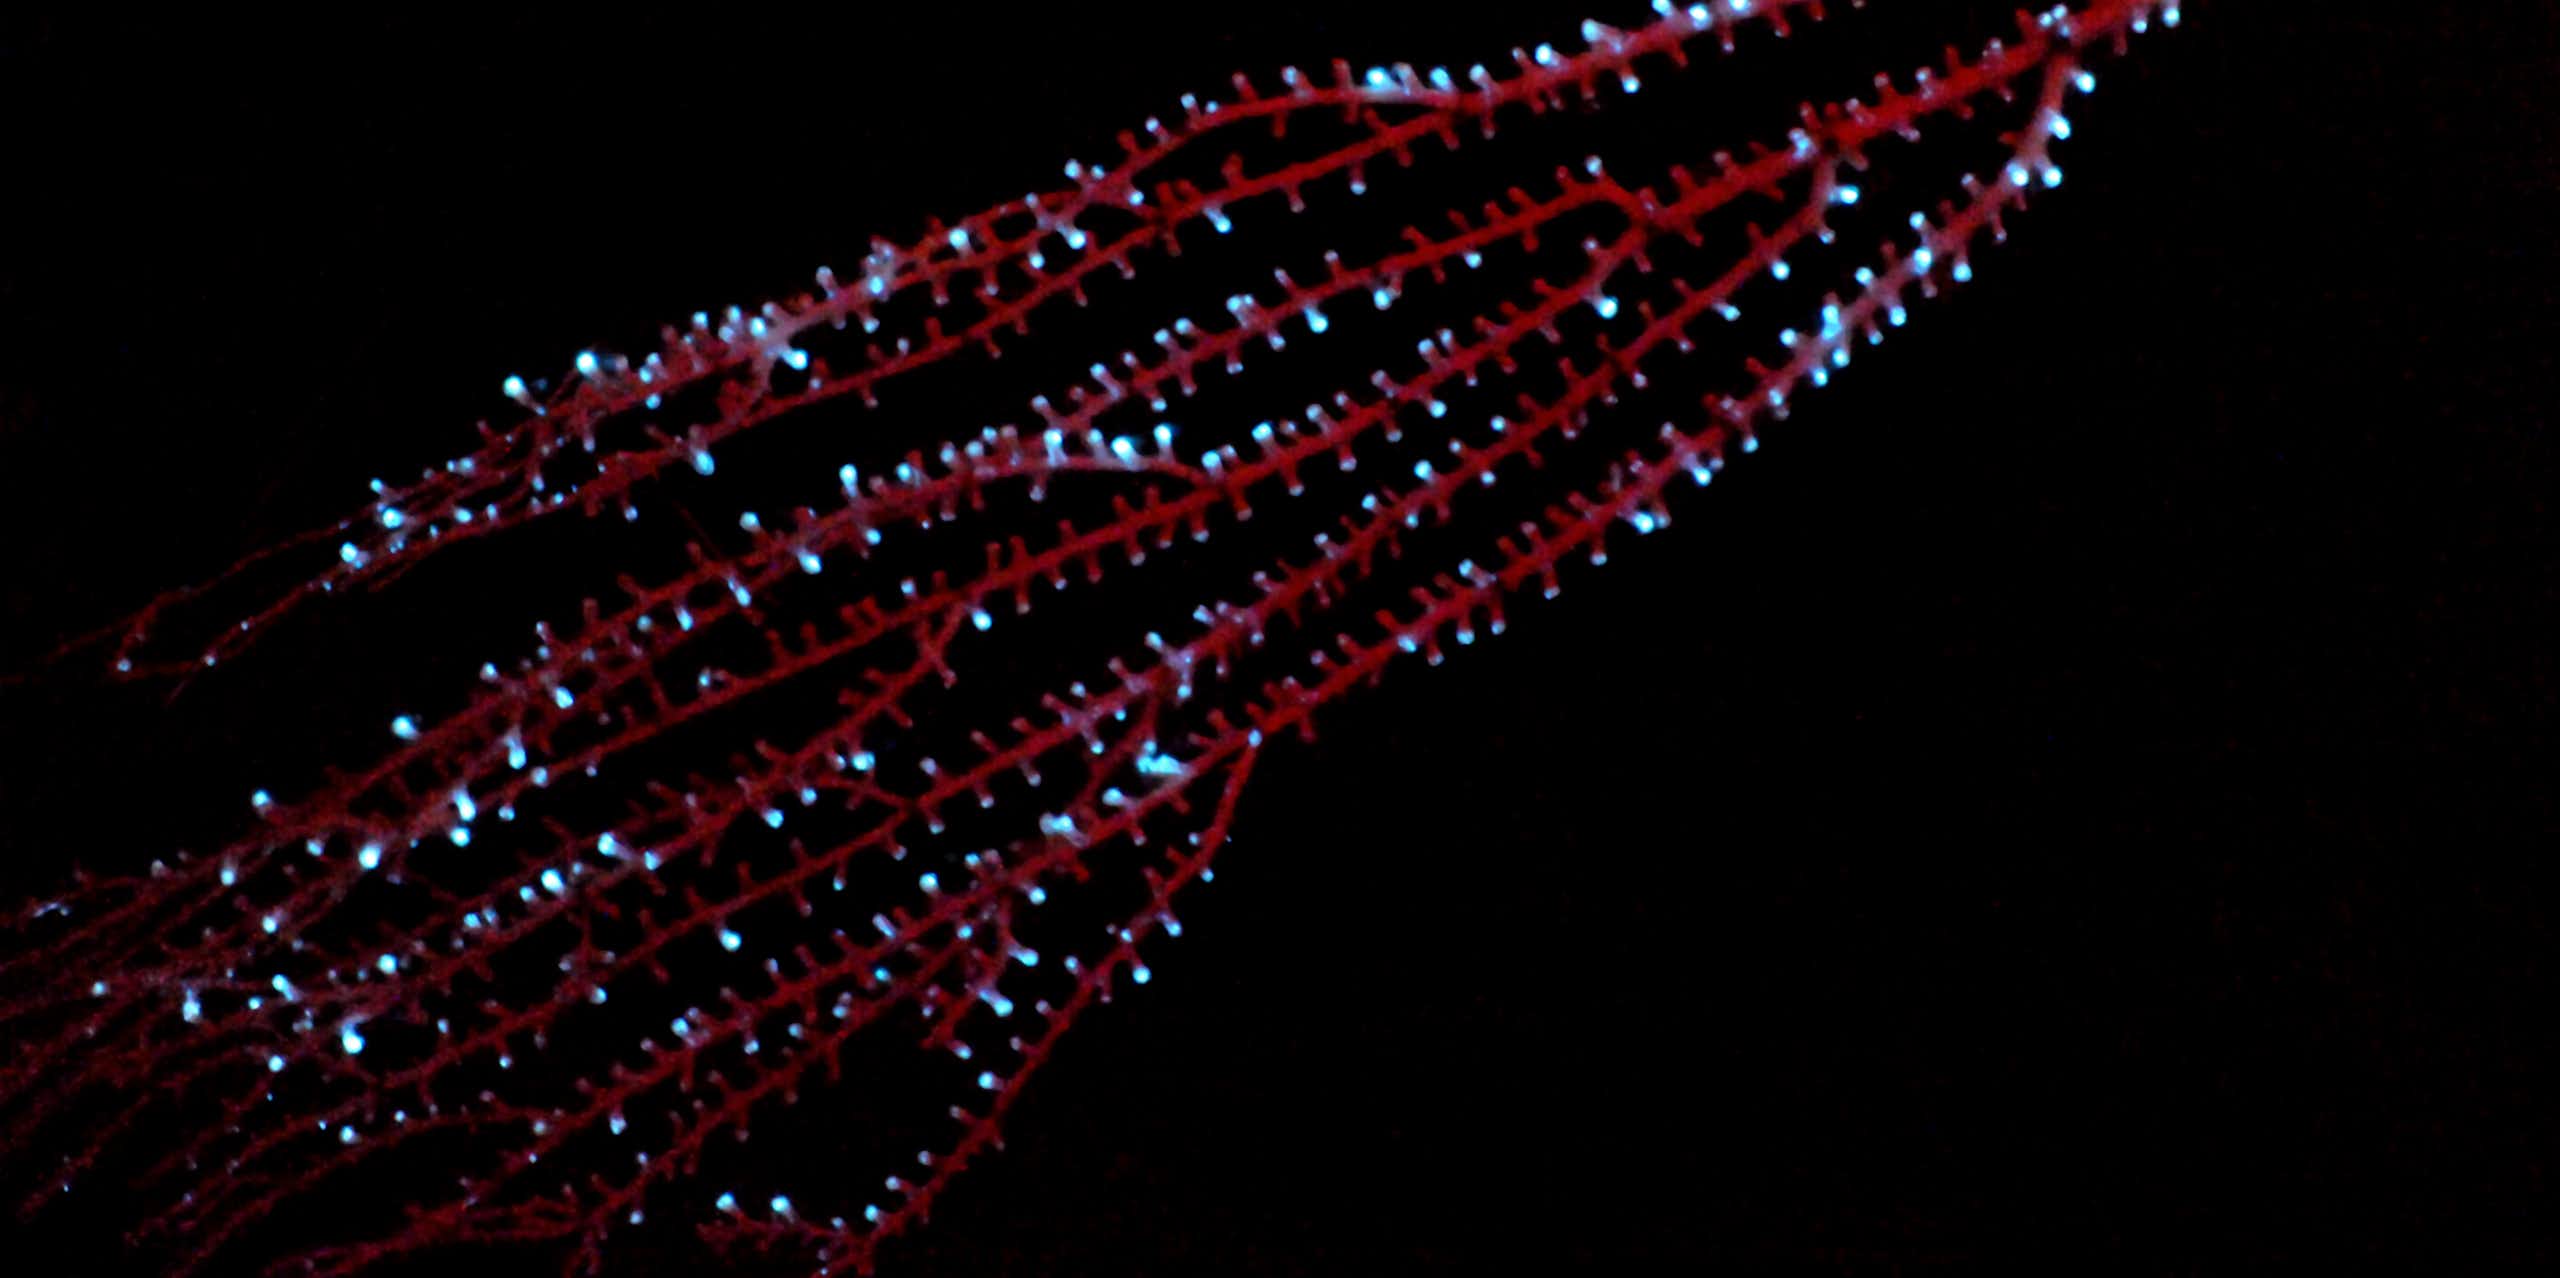 A branching red coral dotted with small blue points of light